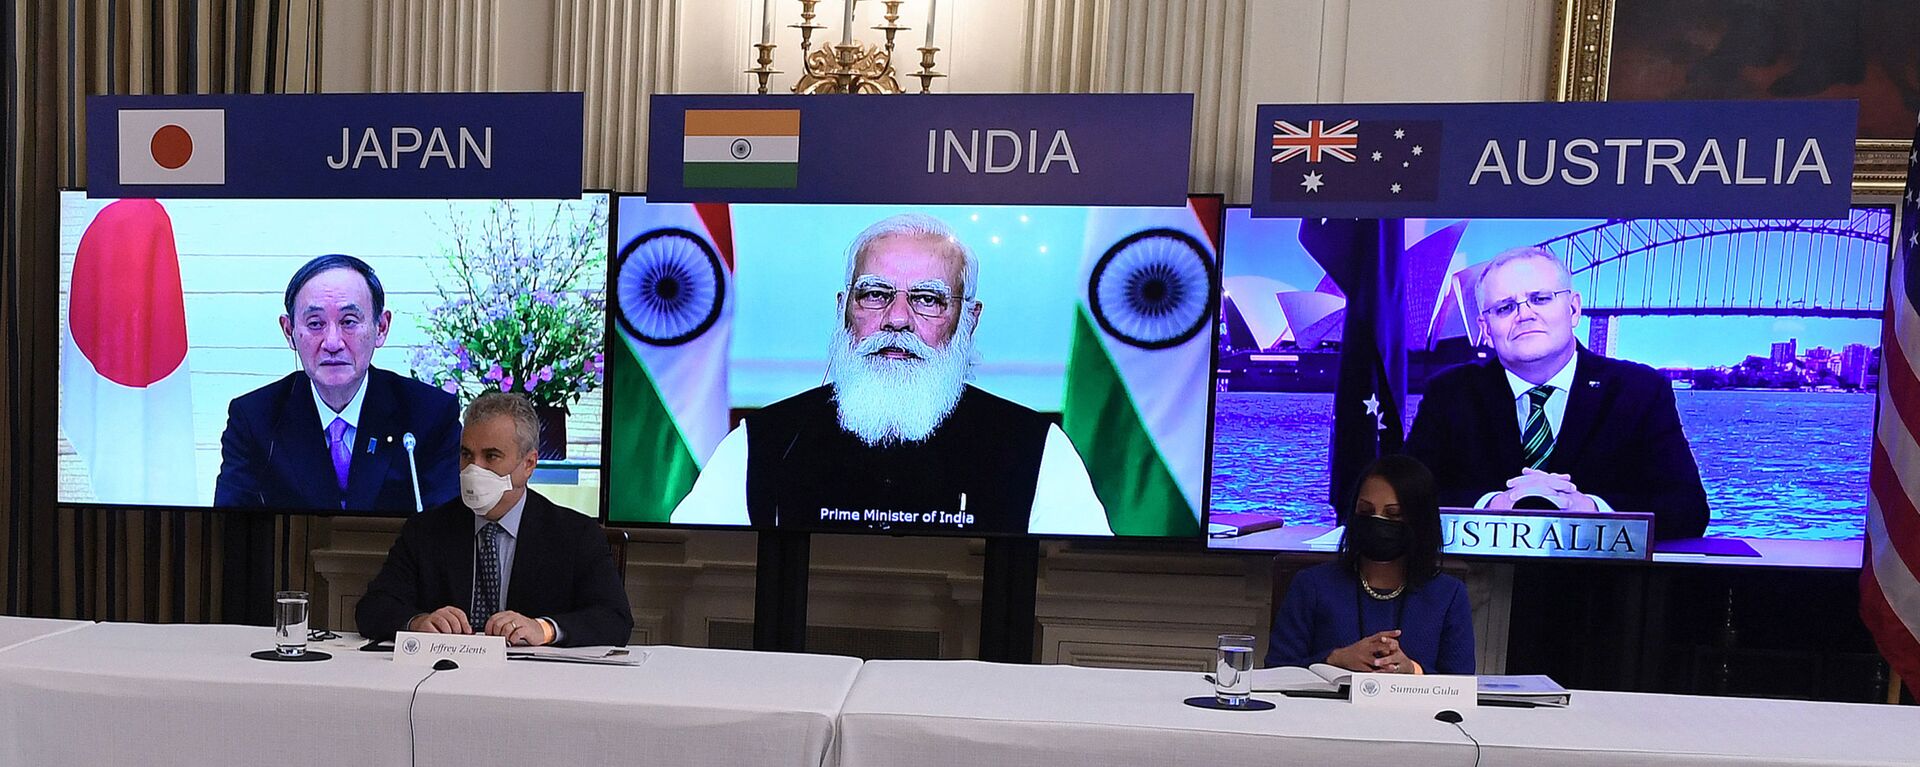 (On screens, L-R) Japanese Prime Minister Yoshihide Suga, Indian Prime Minister Narendra Modi and Australian Prime Minister Scott Morrison listen during a virtual meeting of the Quad alliance members: Australia, India, Japan and the US, in the State Dining Room of the White House in Washington, DC, on March 12, 2021. - Sputnik International, 1920, 12.03.2021